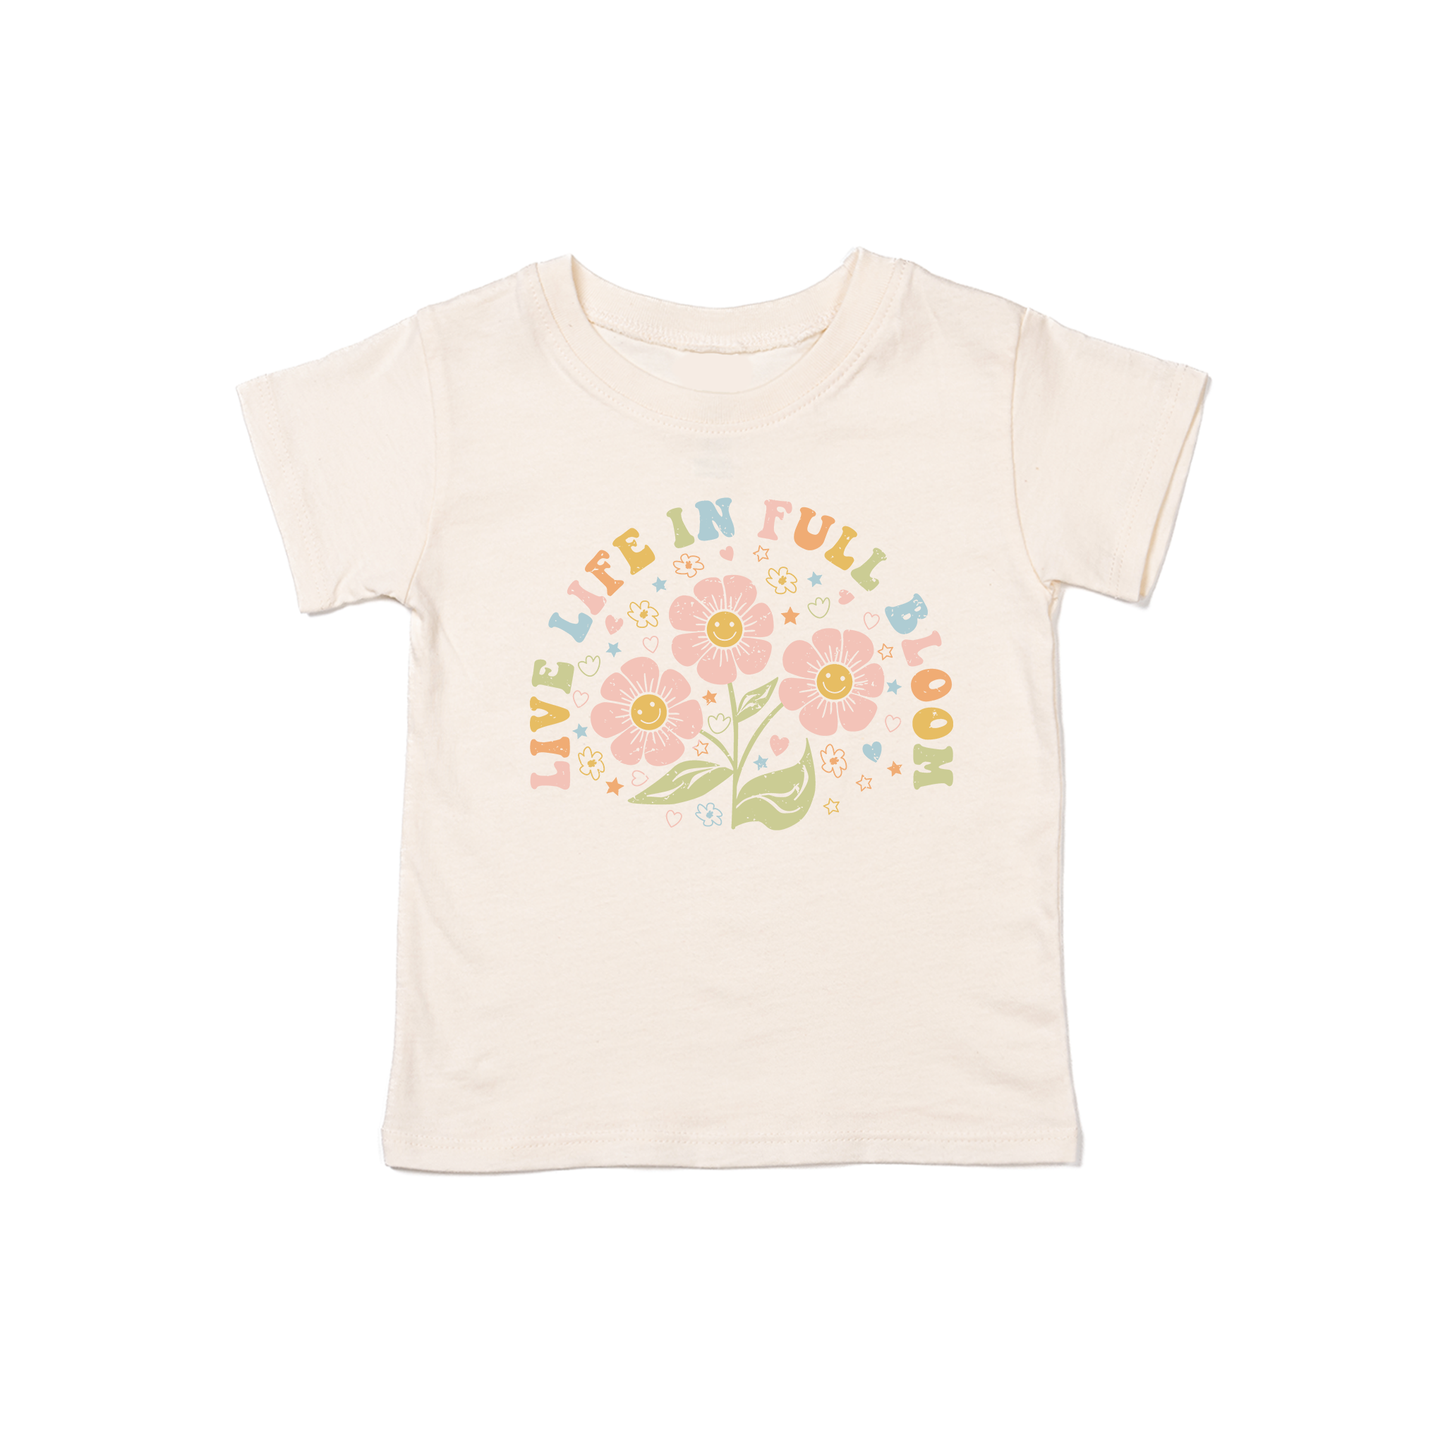 Live Life in Full Bloom - Kids Tee (Natural)